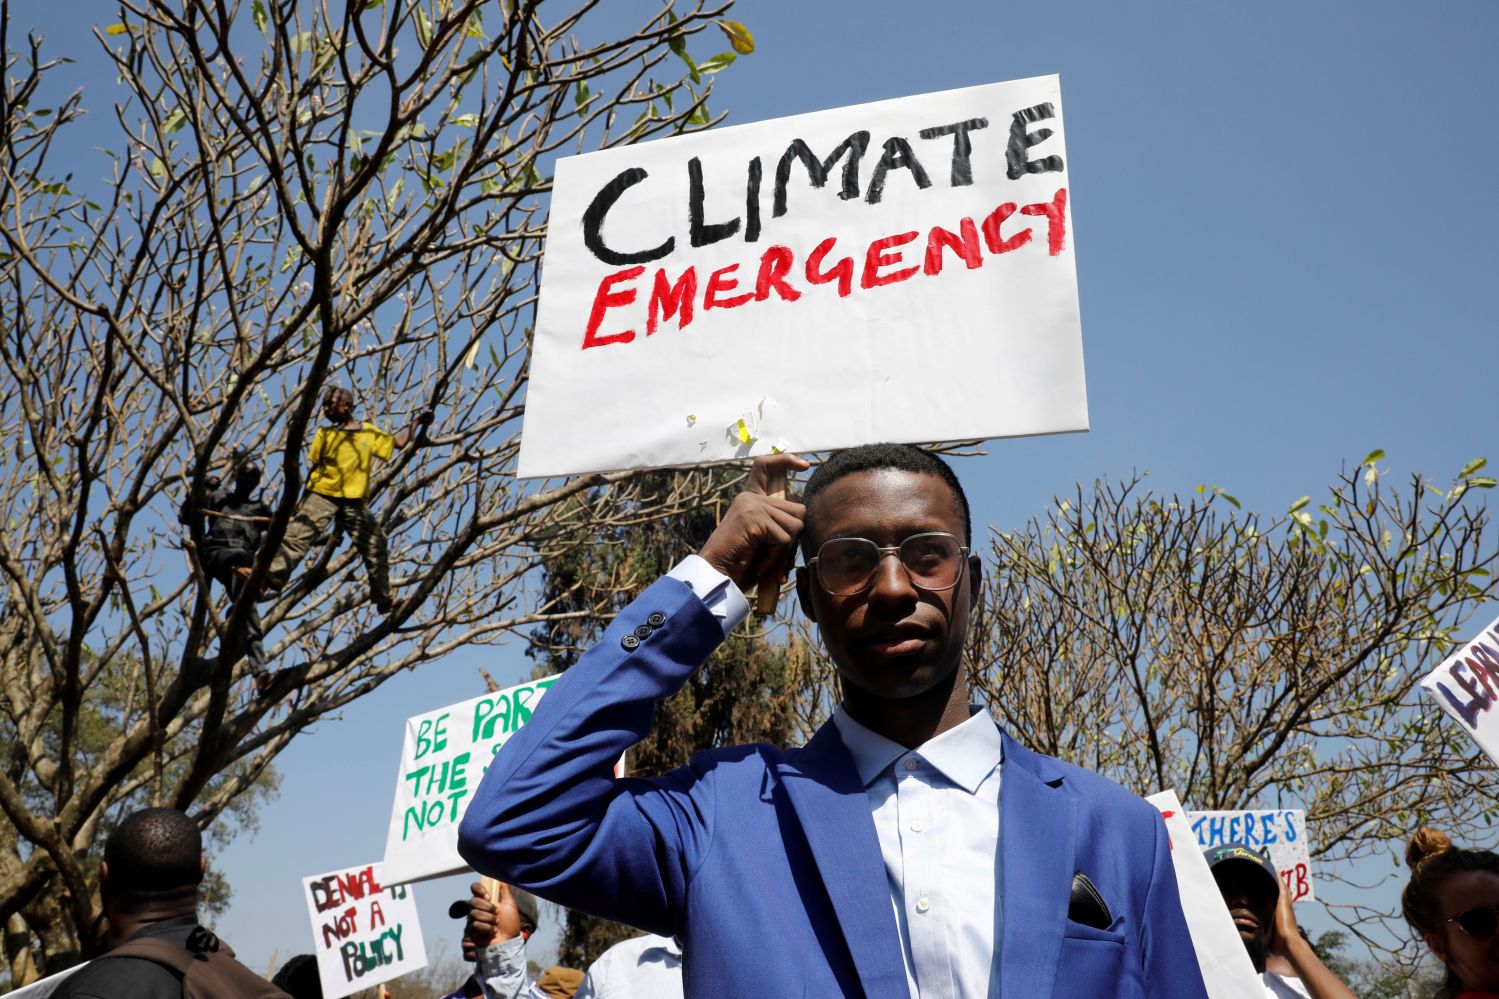 An environmental activist holds a sign as he takes part in the Climate strike protest calling for action on climate change, in Nairobi, Kenya, September 20, 2019. REUTERS/Baz Ratner